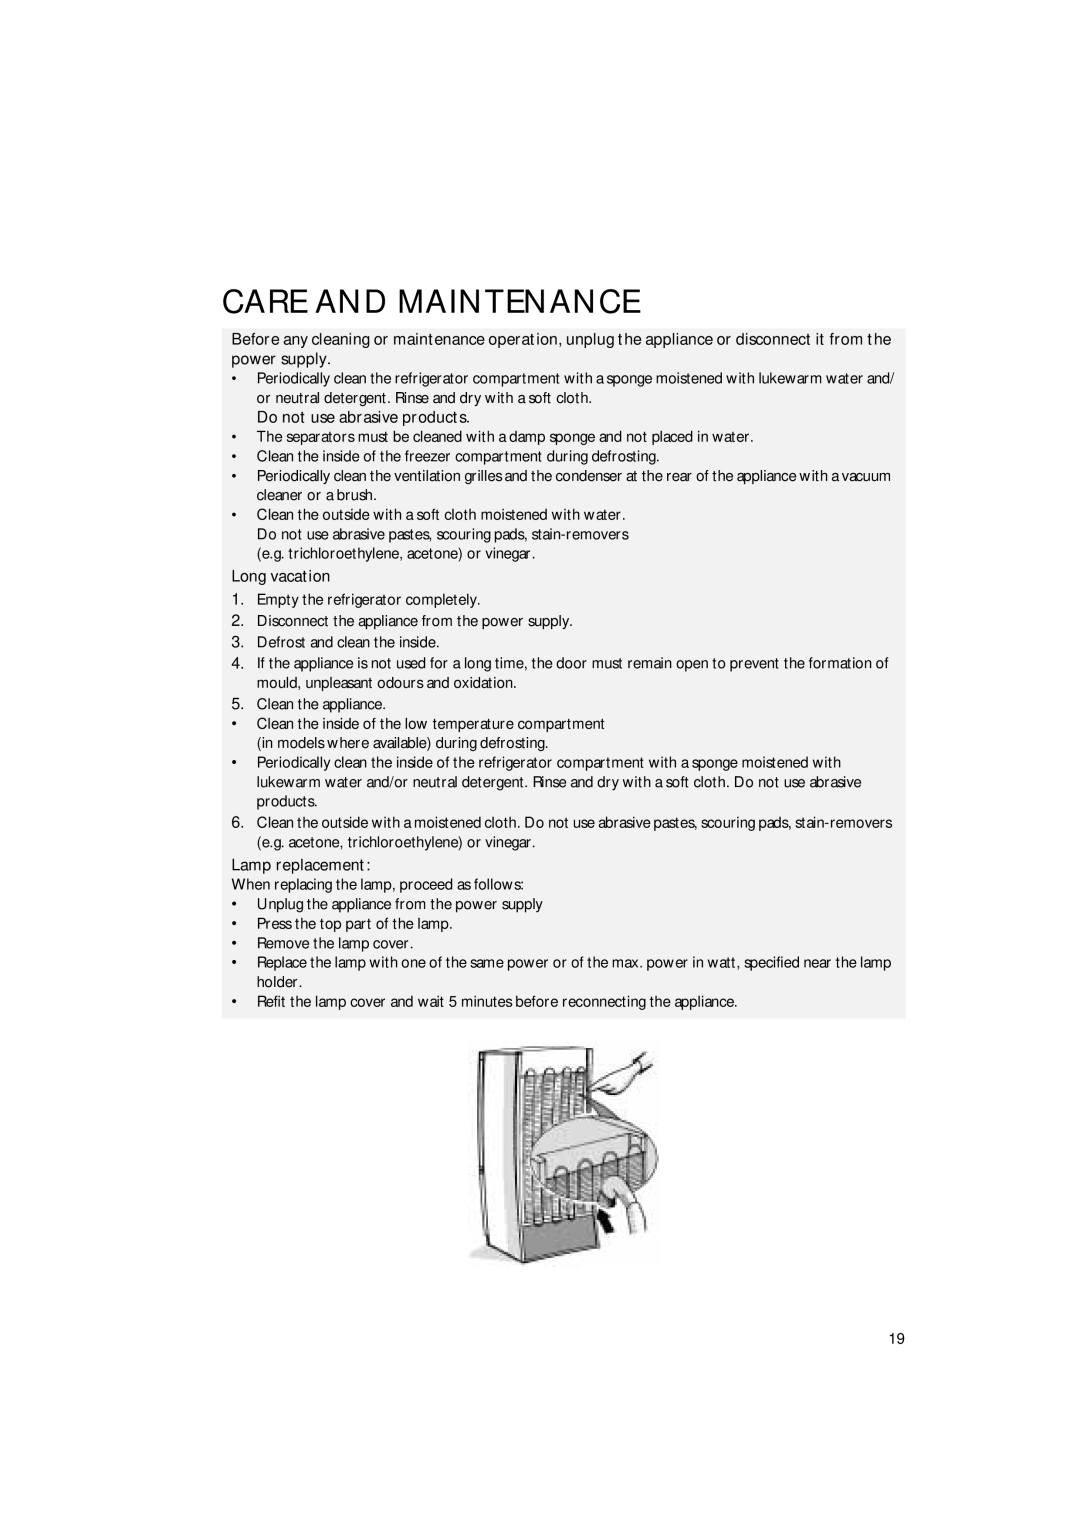 Smeg FR310APL manual Care And Maintenance, Do not use abrasive products, Long vacation, Lamp replacement 